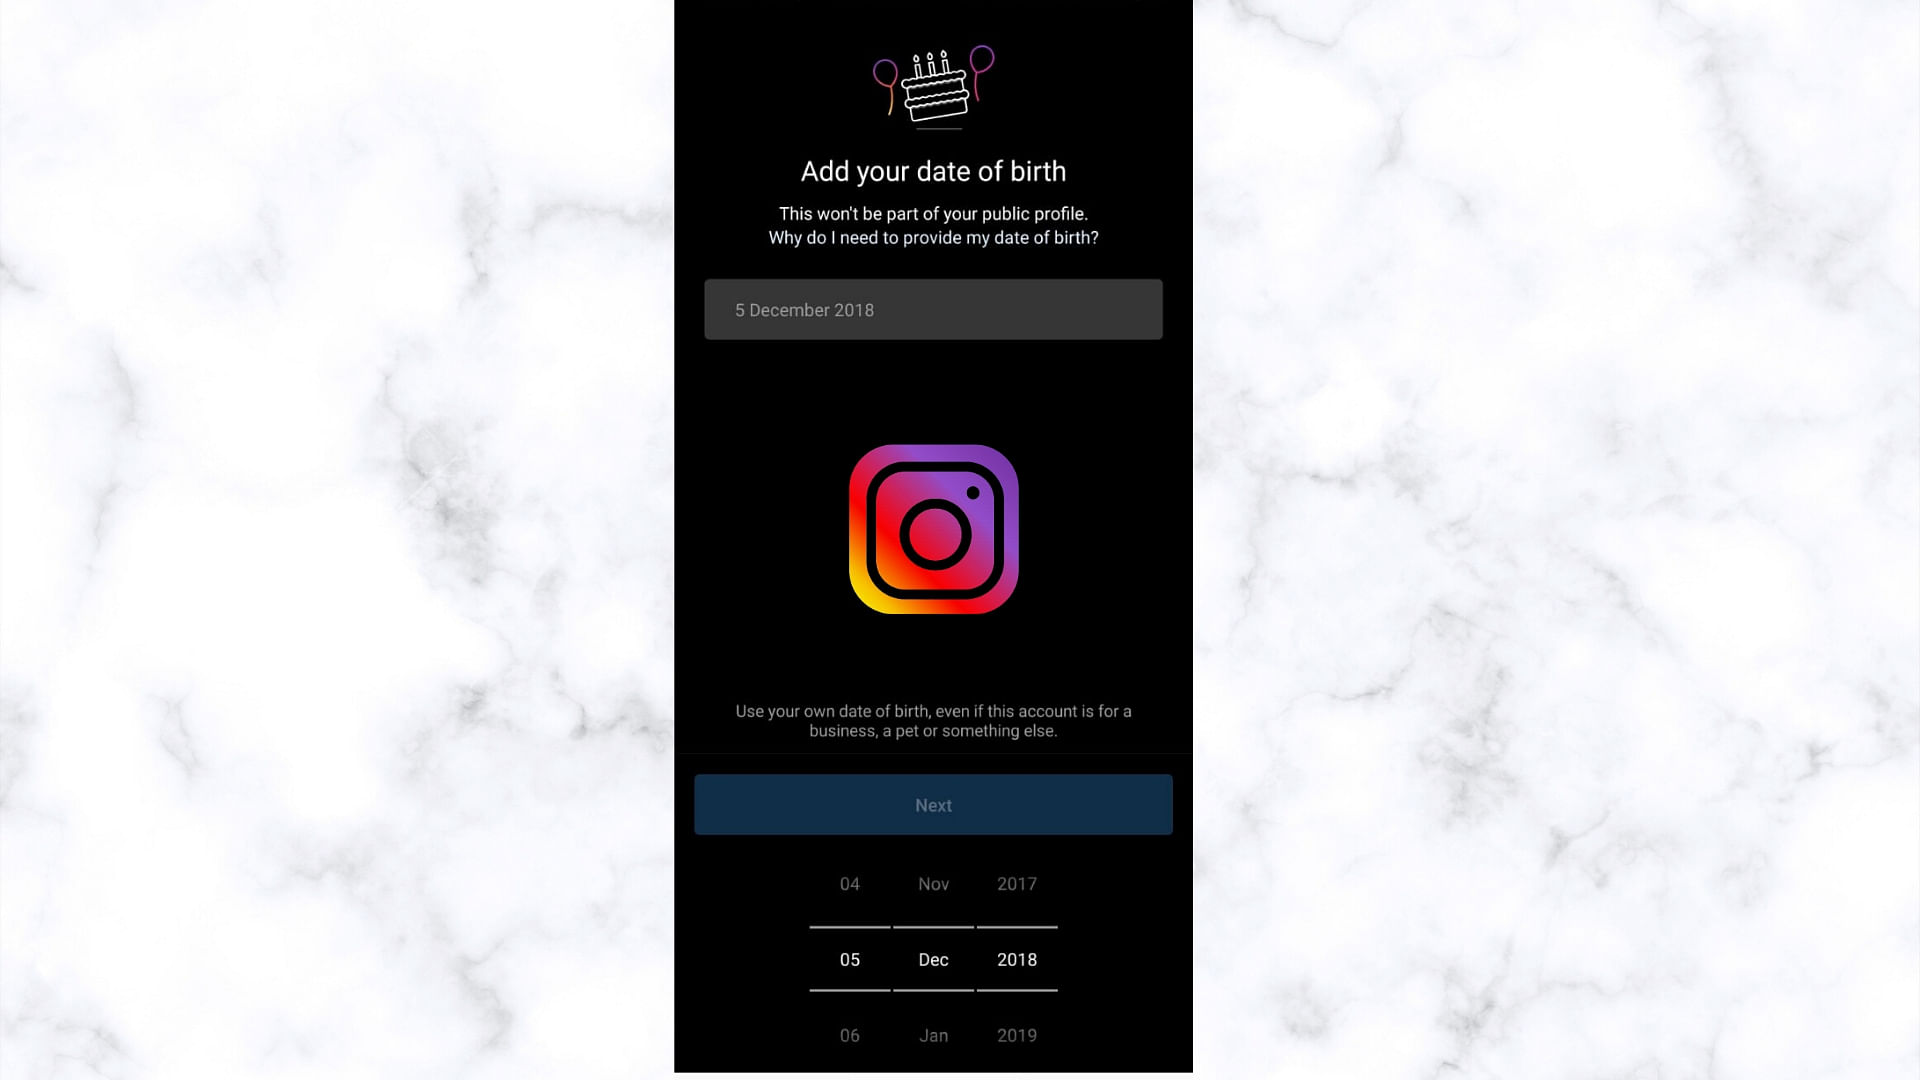 The move aims to help Instagram comply with a US law and its own policies that require any user to be at least 13.